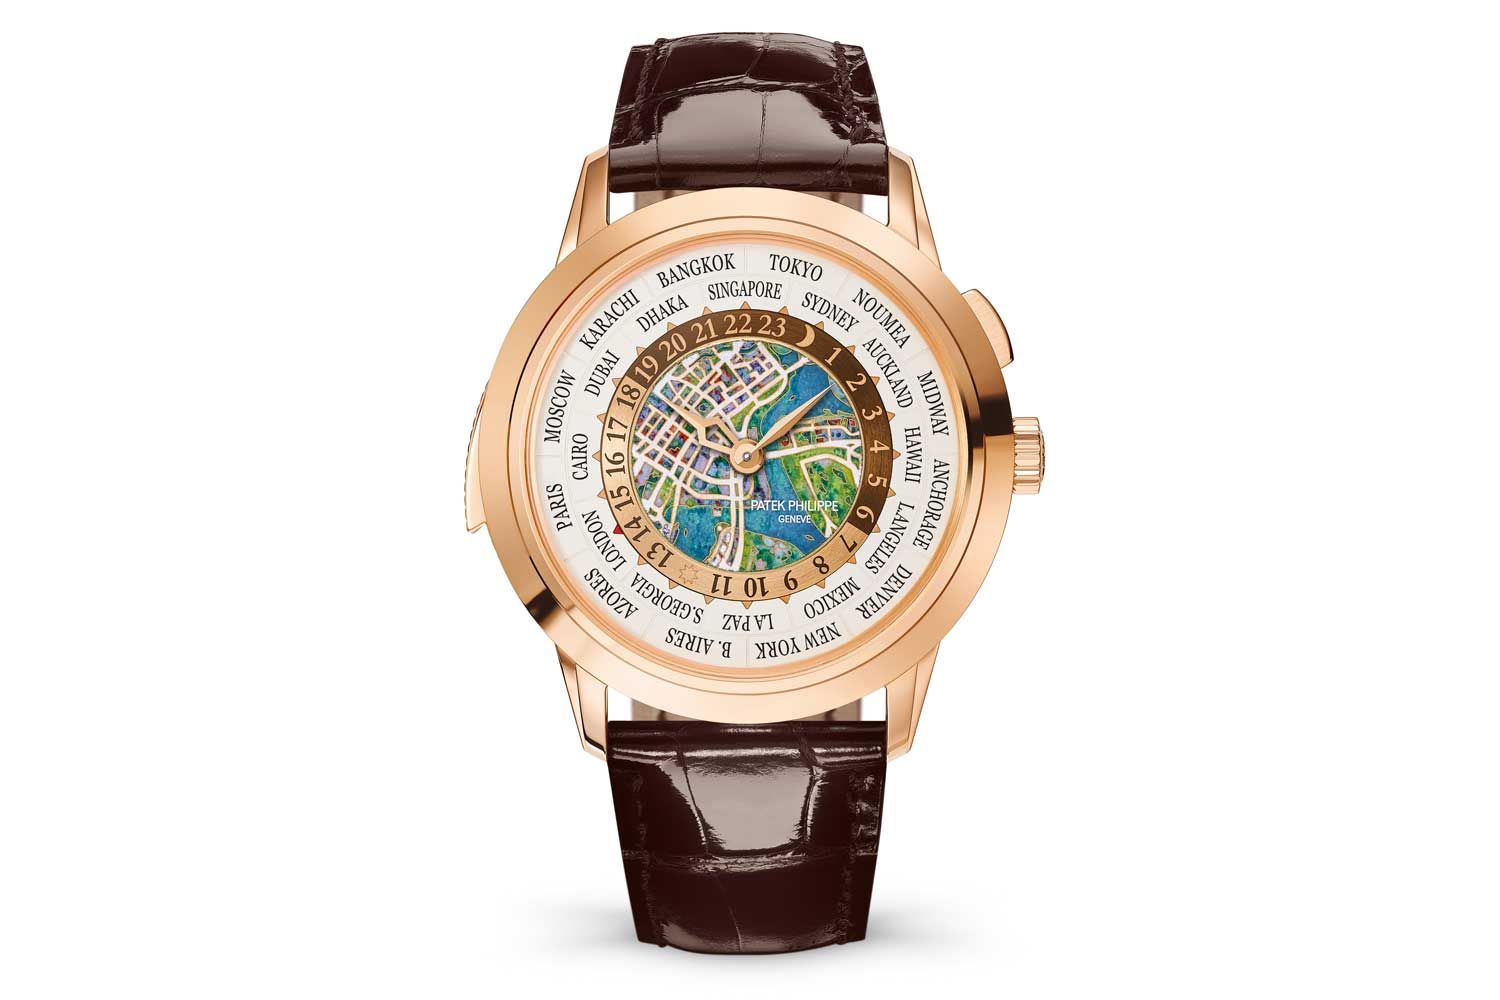 In 2019, Patek Philippe unveiled a stunning version of the 5531R with an aerial map of Singapore in cloisonné enamel to commemorate Patek’s Grand Exhibition in the city.